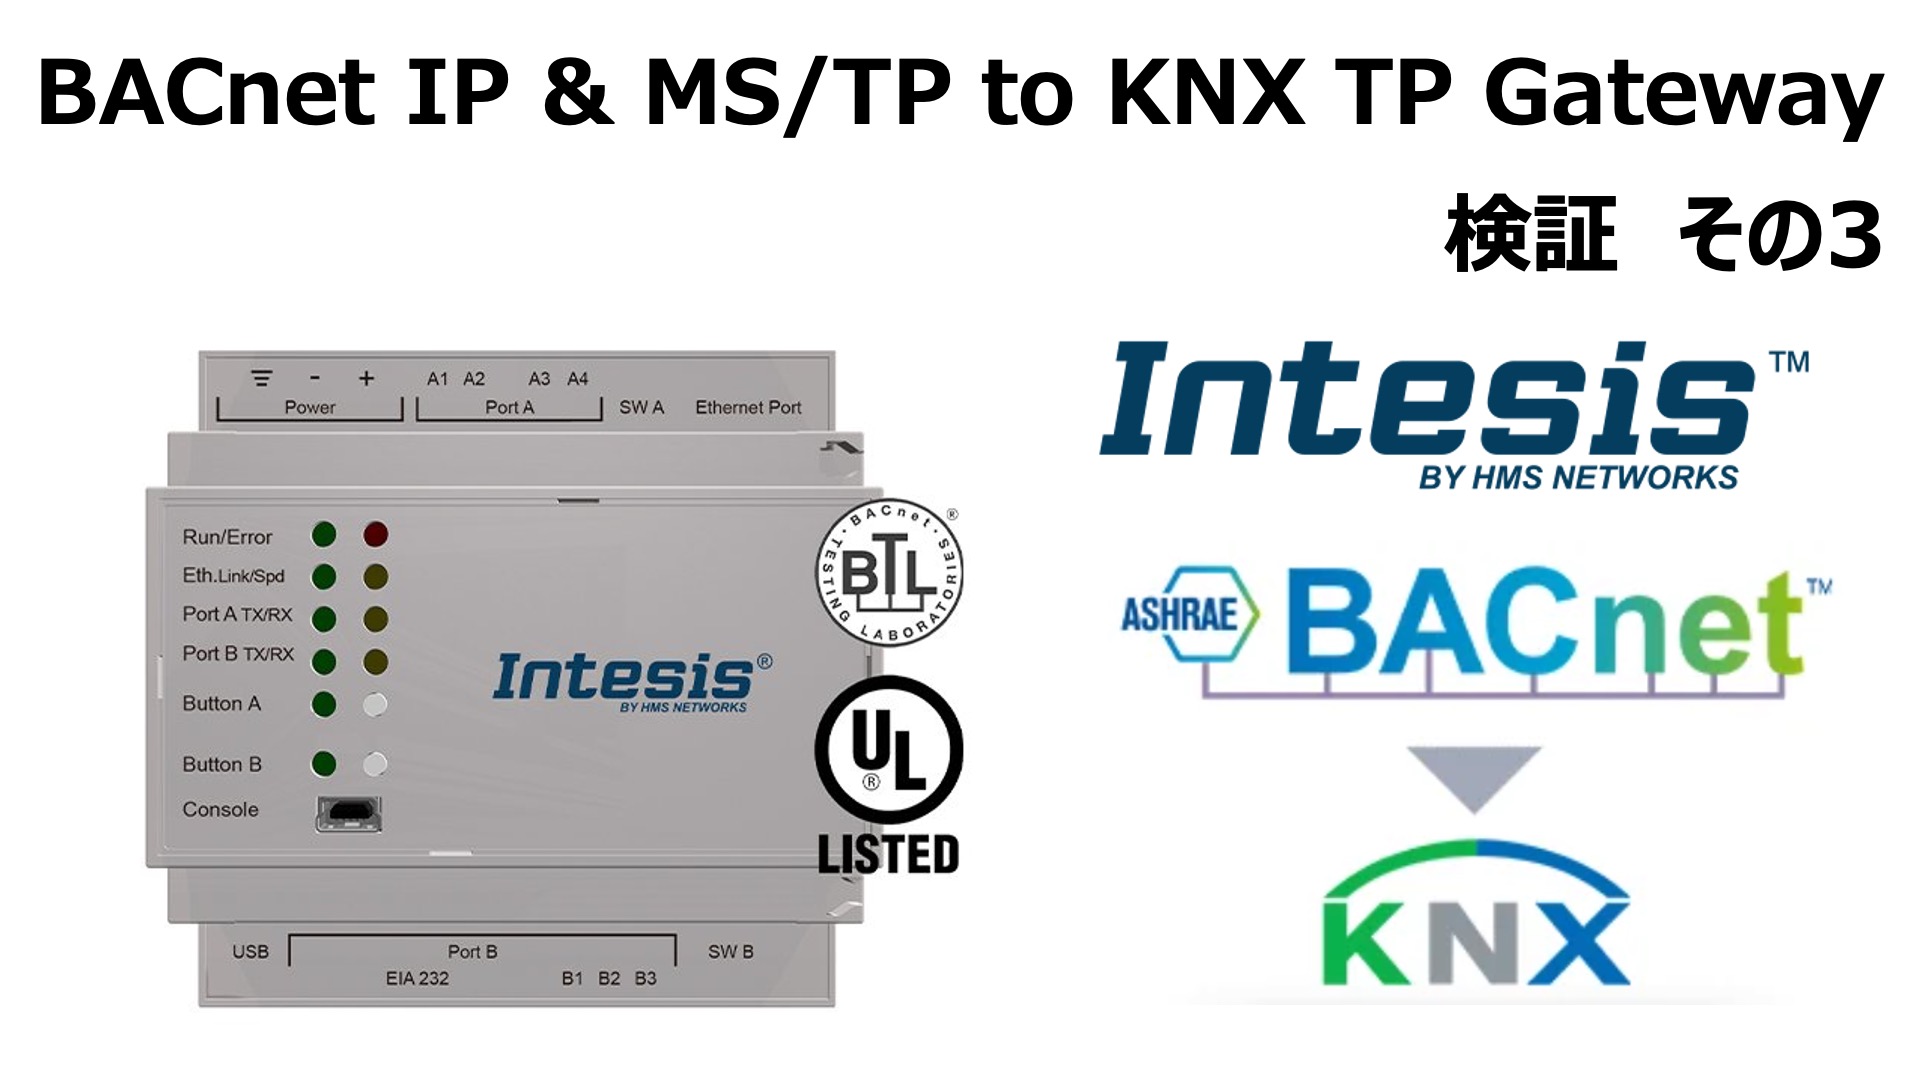 INTESIS BACnet IP & MS/TP Client to KNX TP Gateway 検証その3